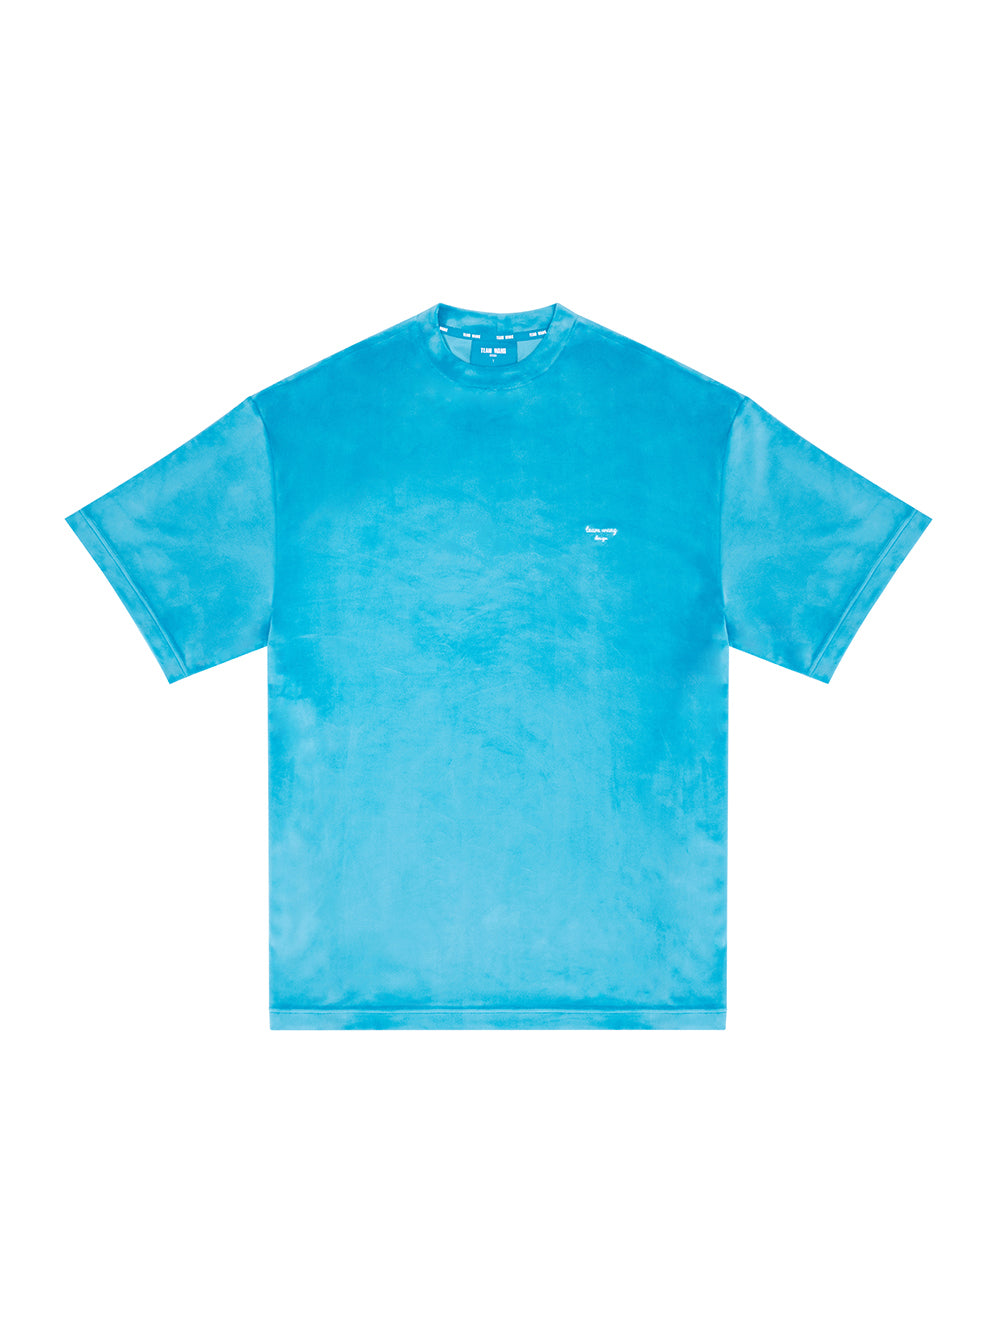 STAY FOR THE NIGHT OVERSIZED T-SHIRT (BLUE)